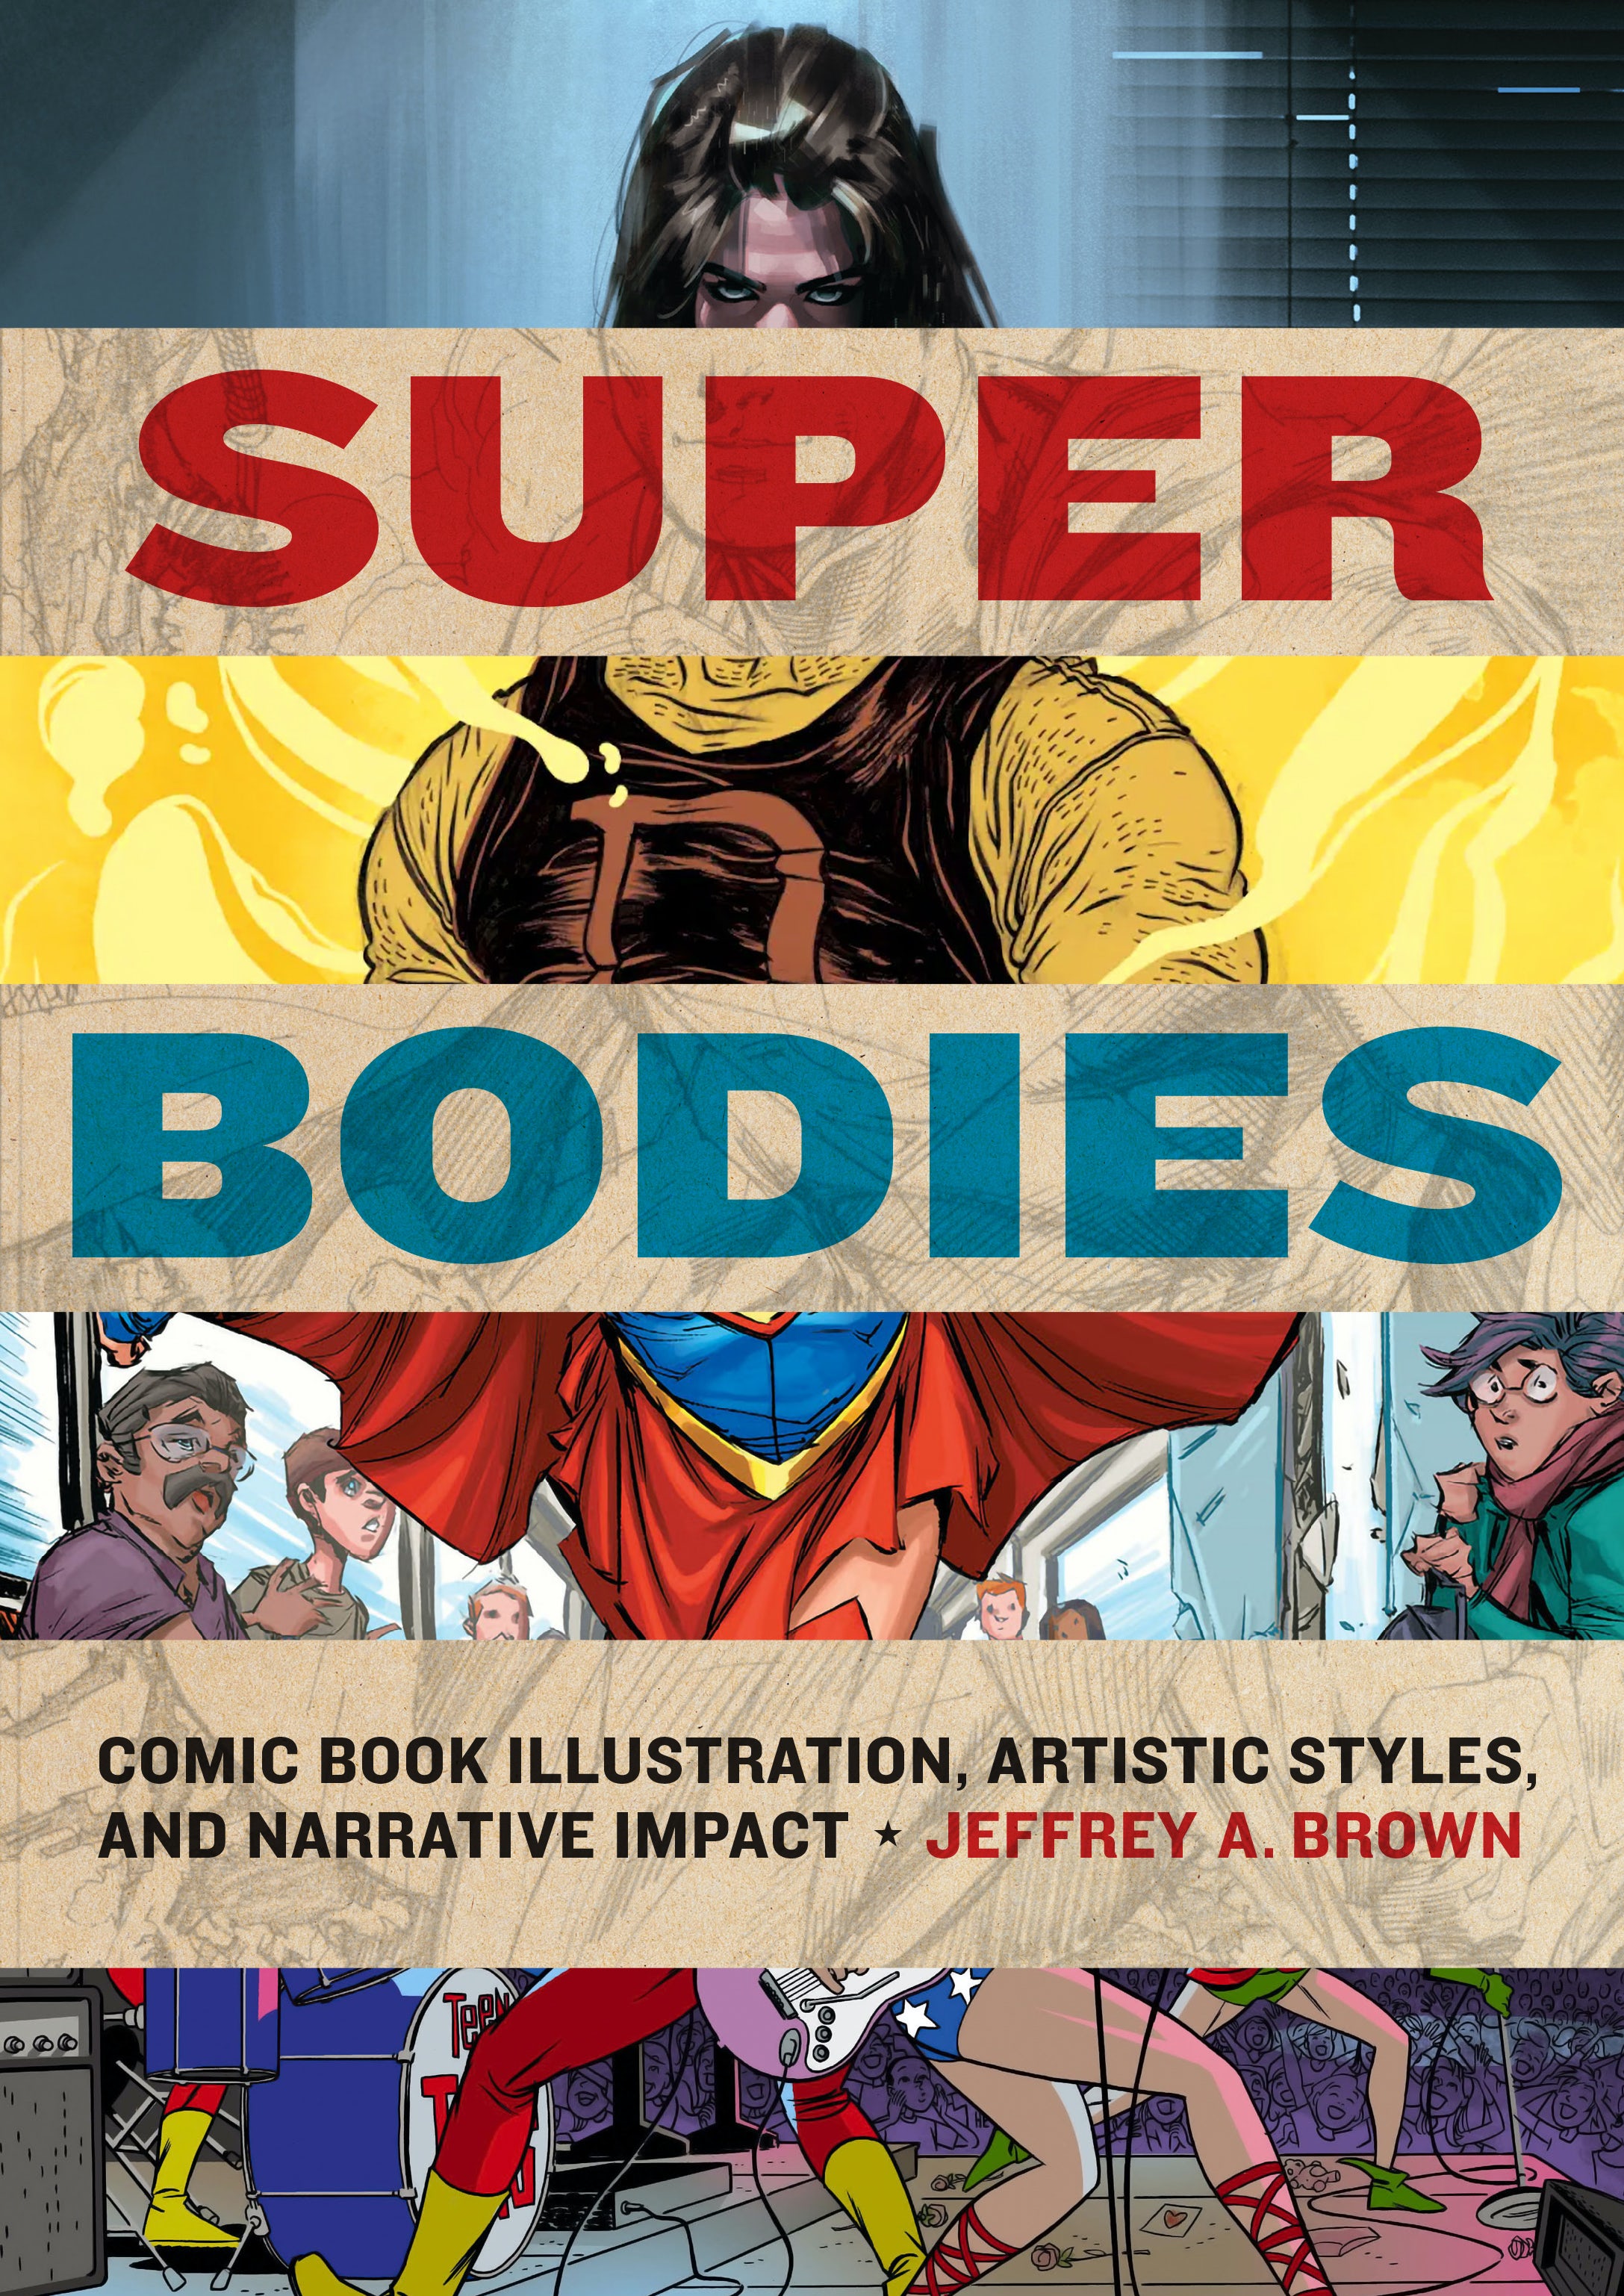 I’m Not a Hero, I’m Just Drawn That Way: A Review of Super Bodies: Comic Book Illustration, Artistic Styles, and Narrative Impact